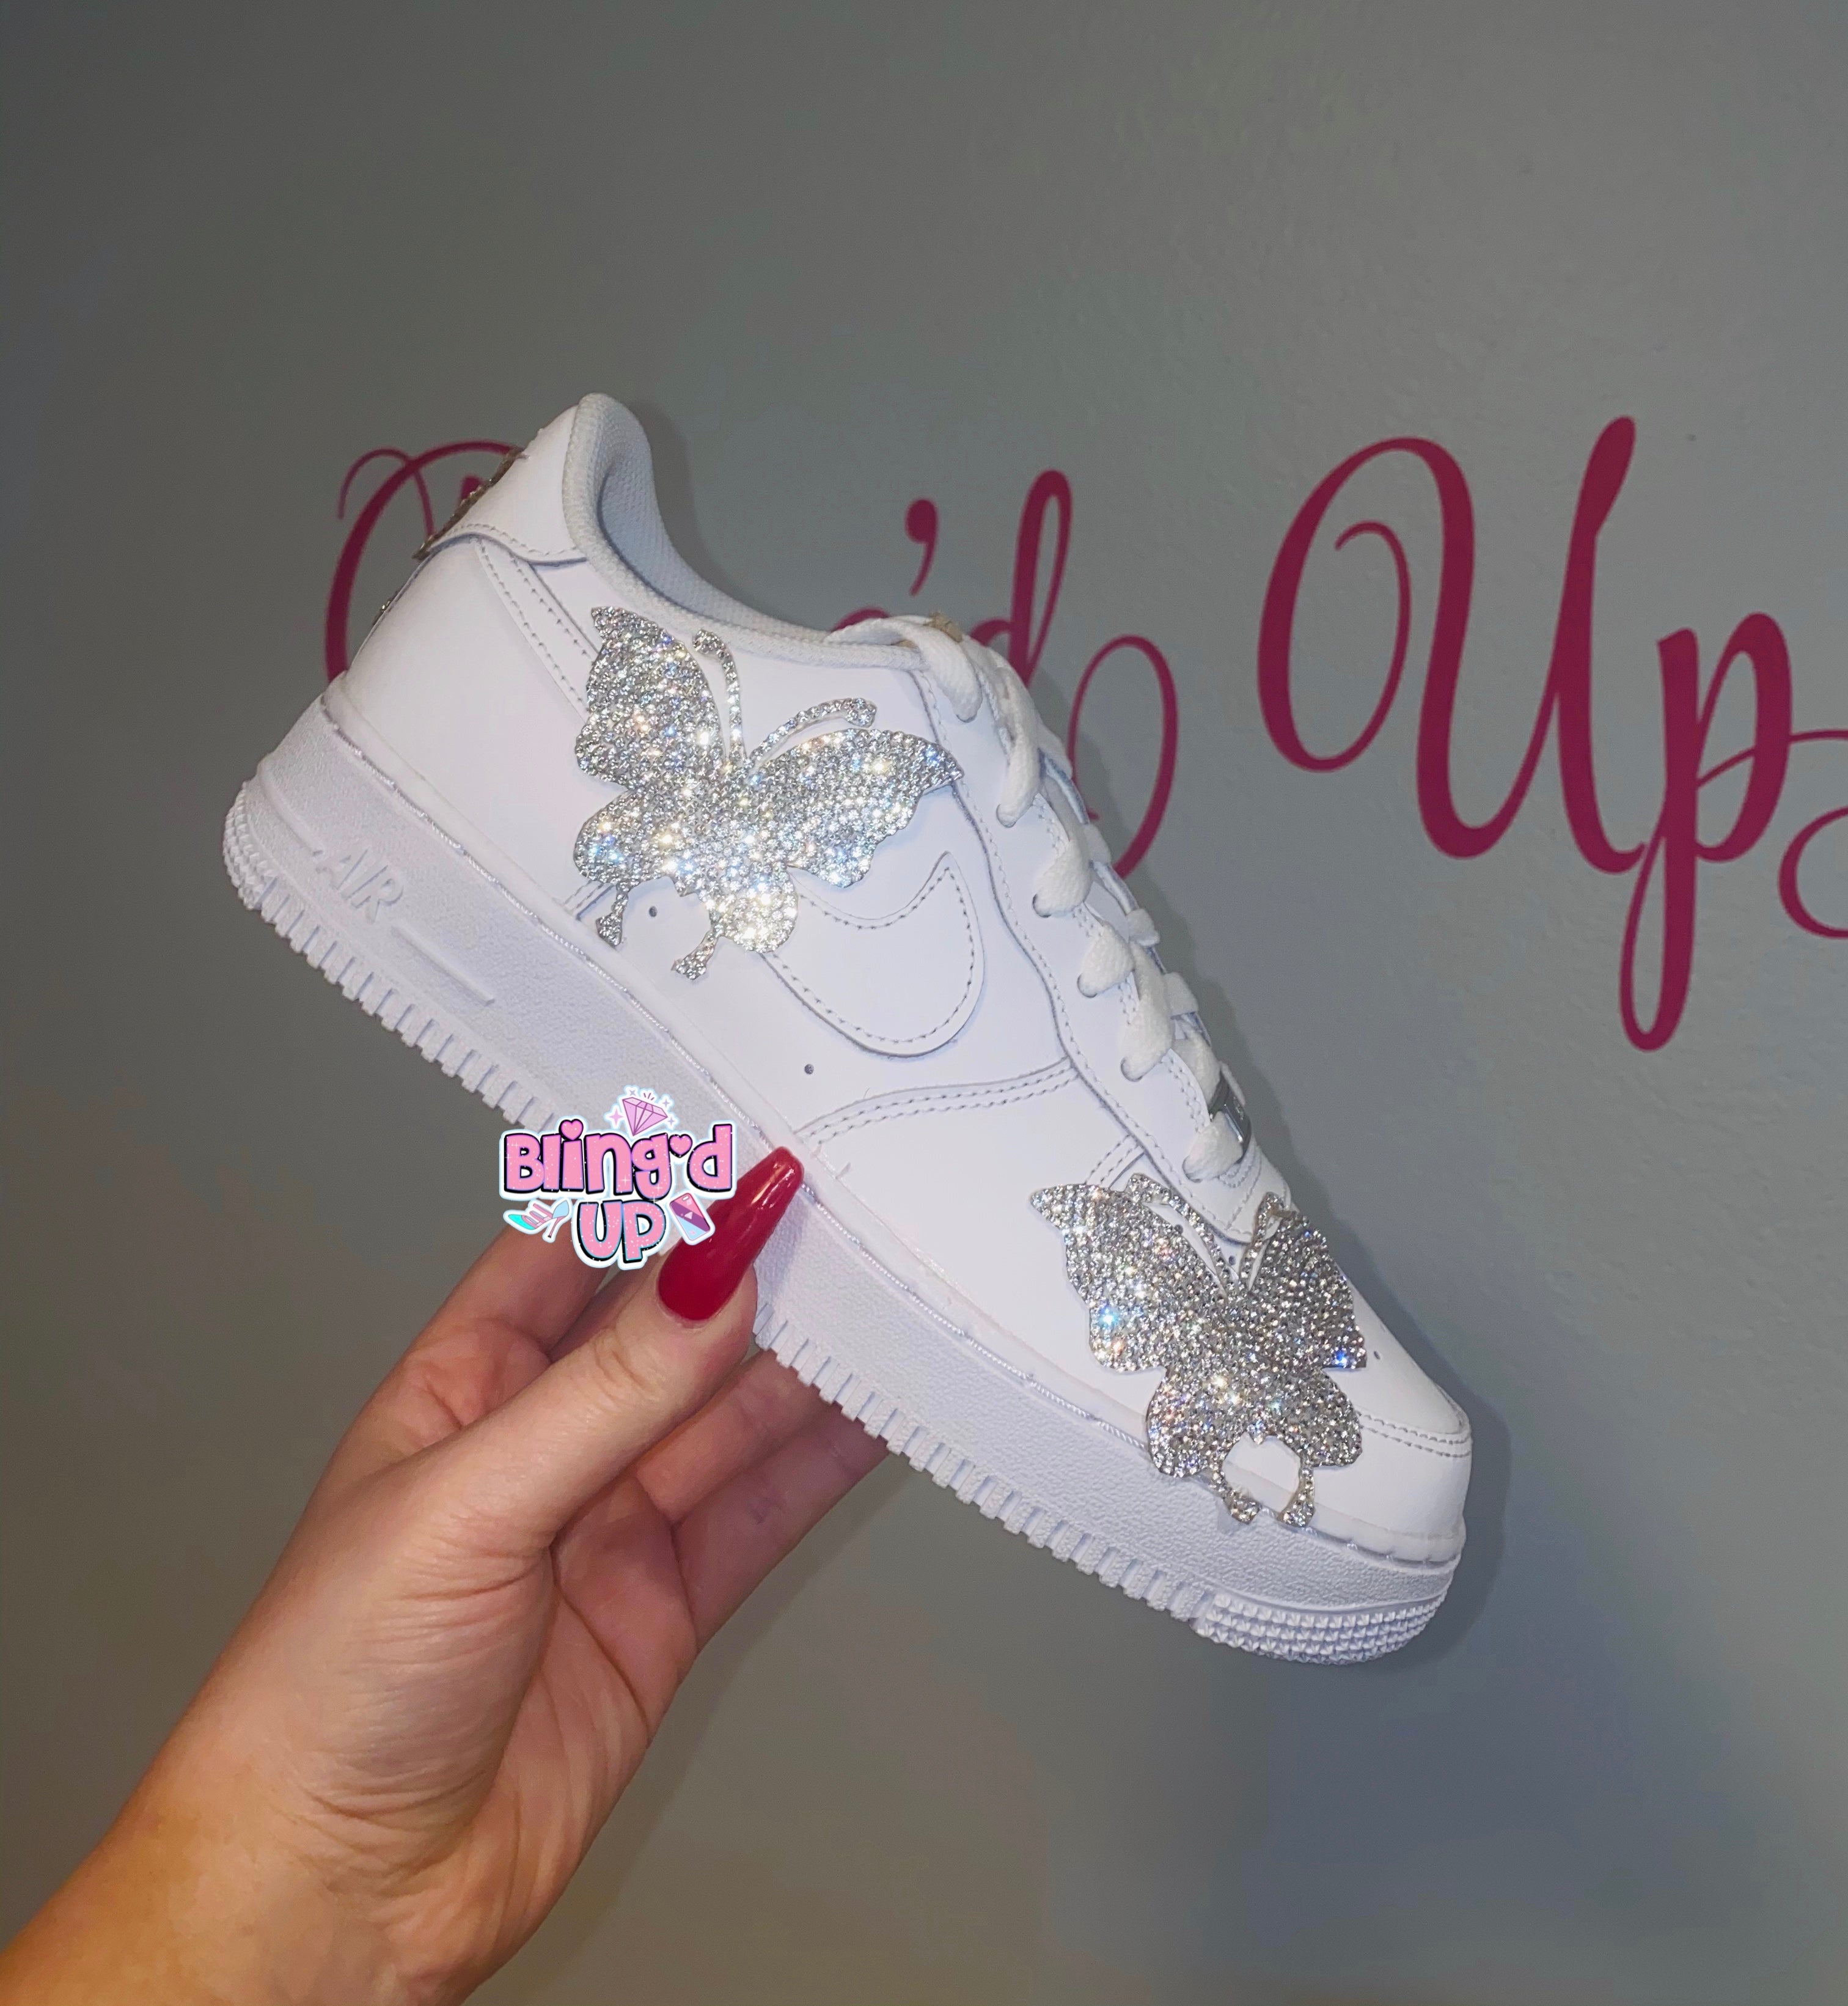 Butterfly Nike Air Force 1 Bling'd Up